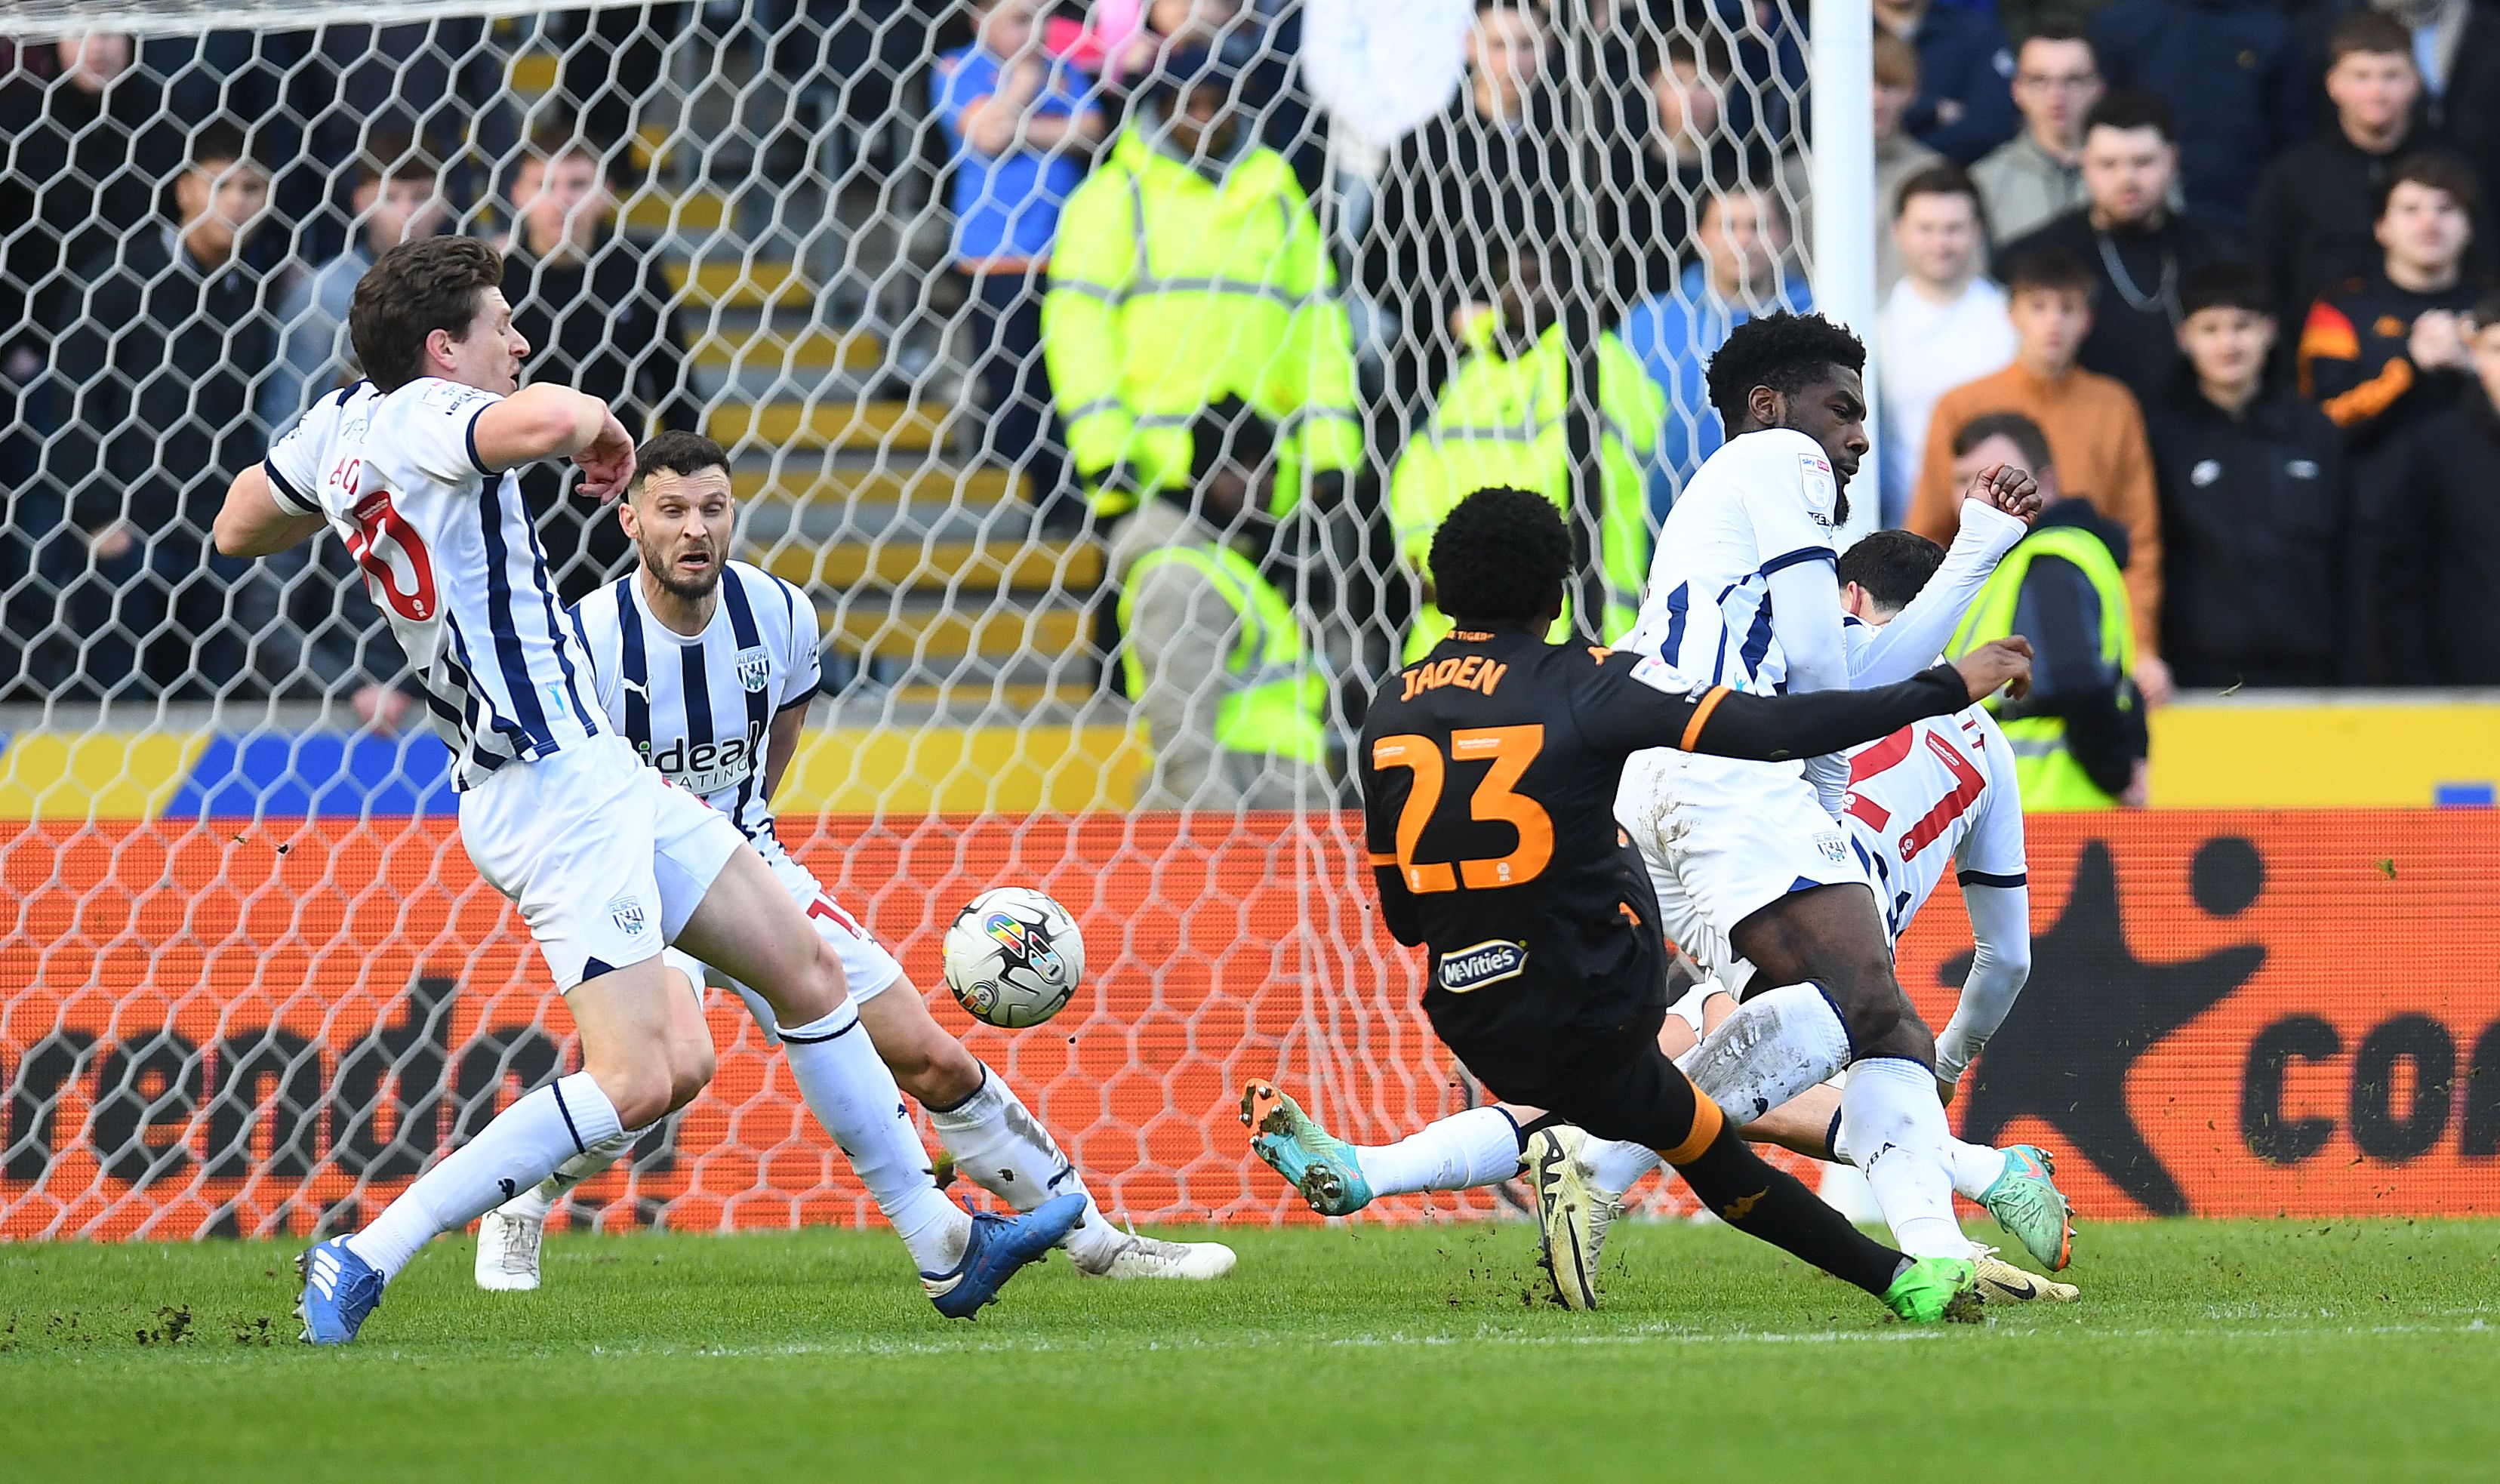 Albion players throw their bodies at the ball to try and block a Hull shot